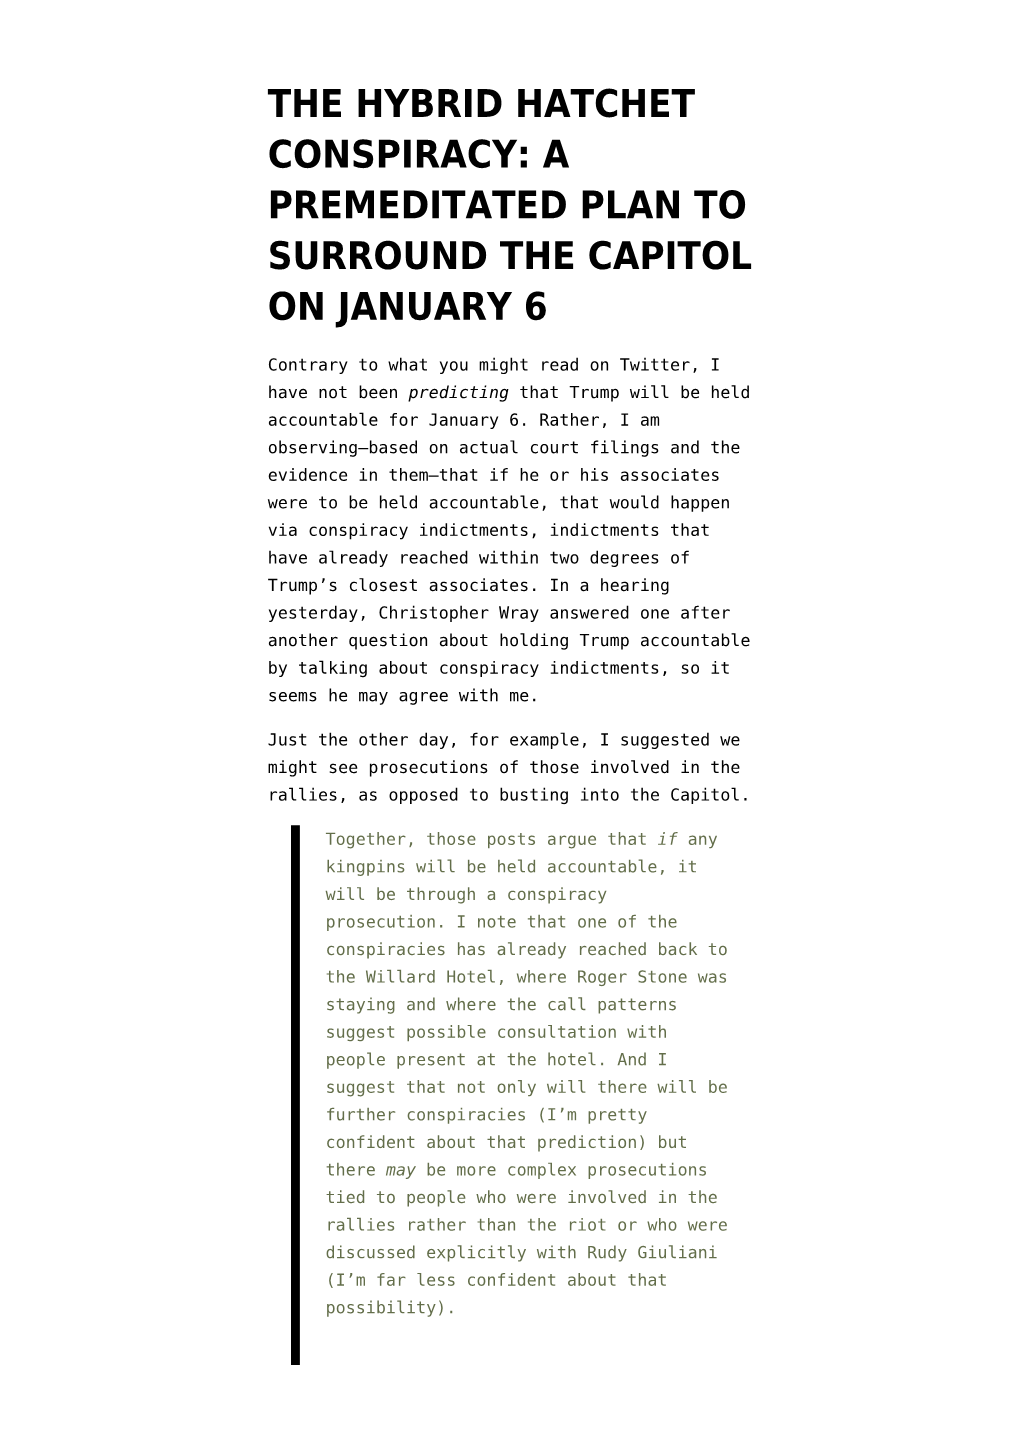 A Premeditated Plan to Surround the Capitol on January 6